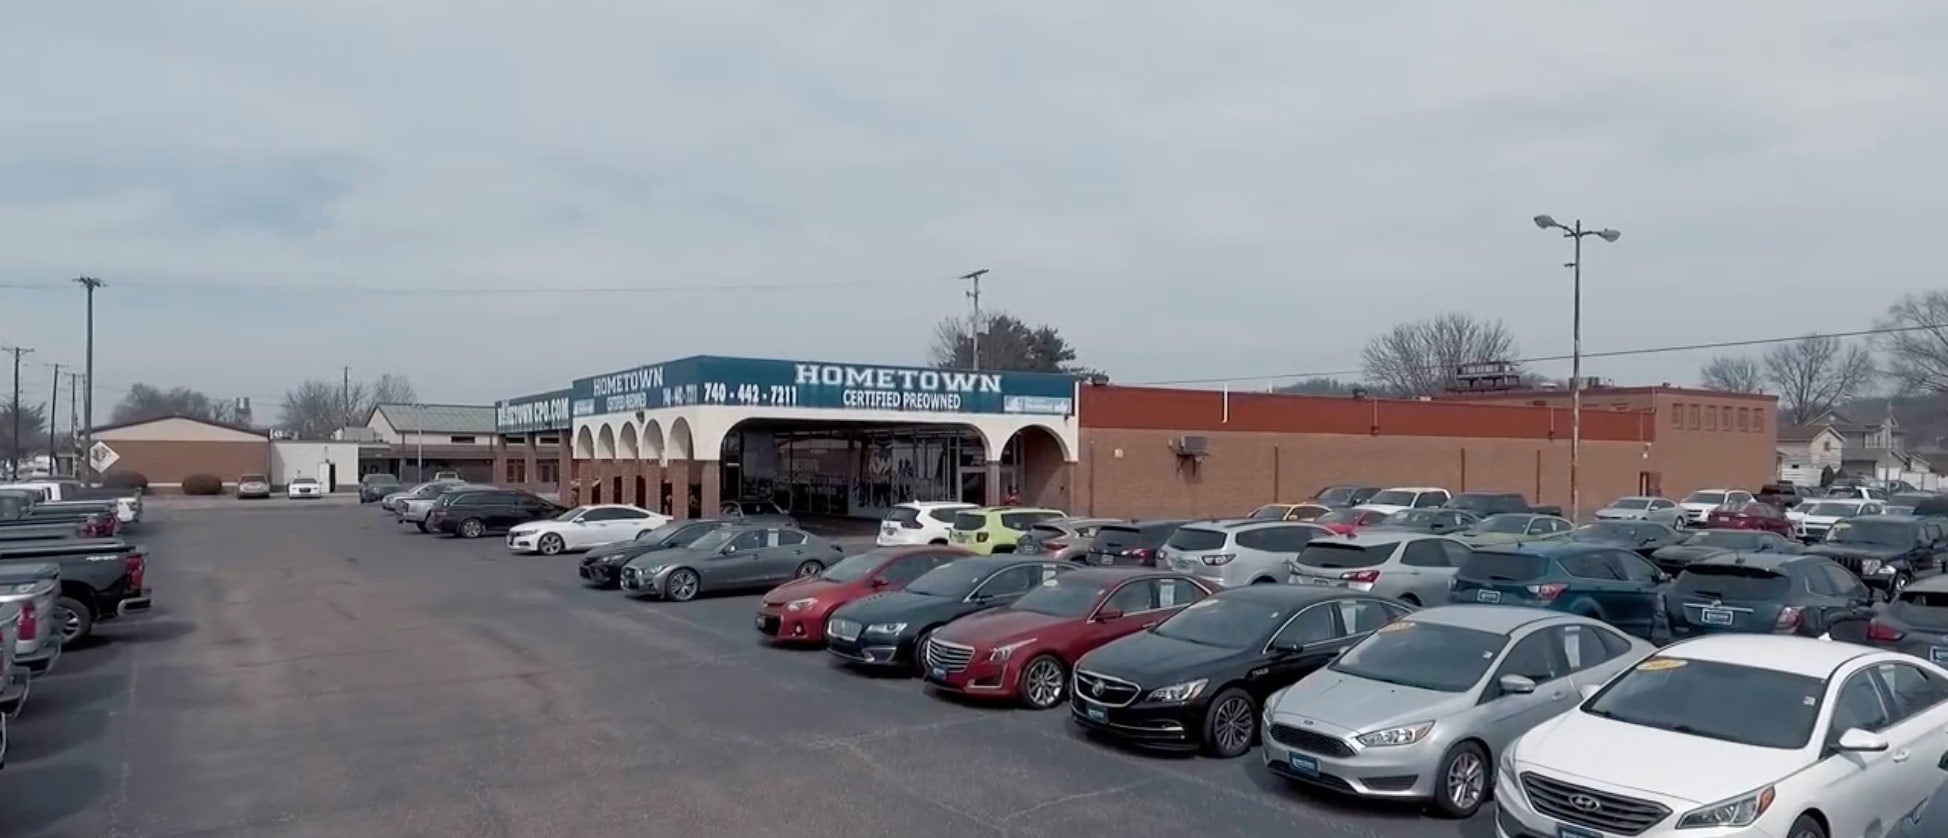 Our Ironton, OH used car dealership